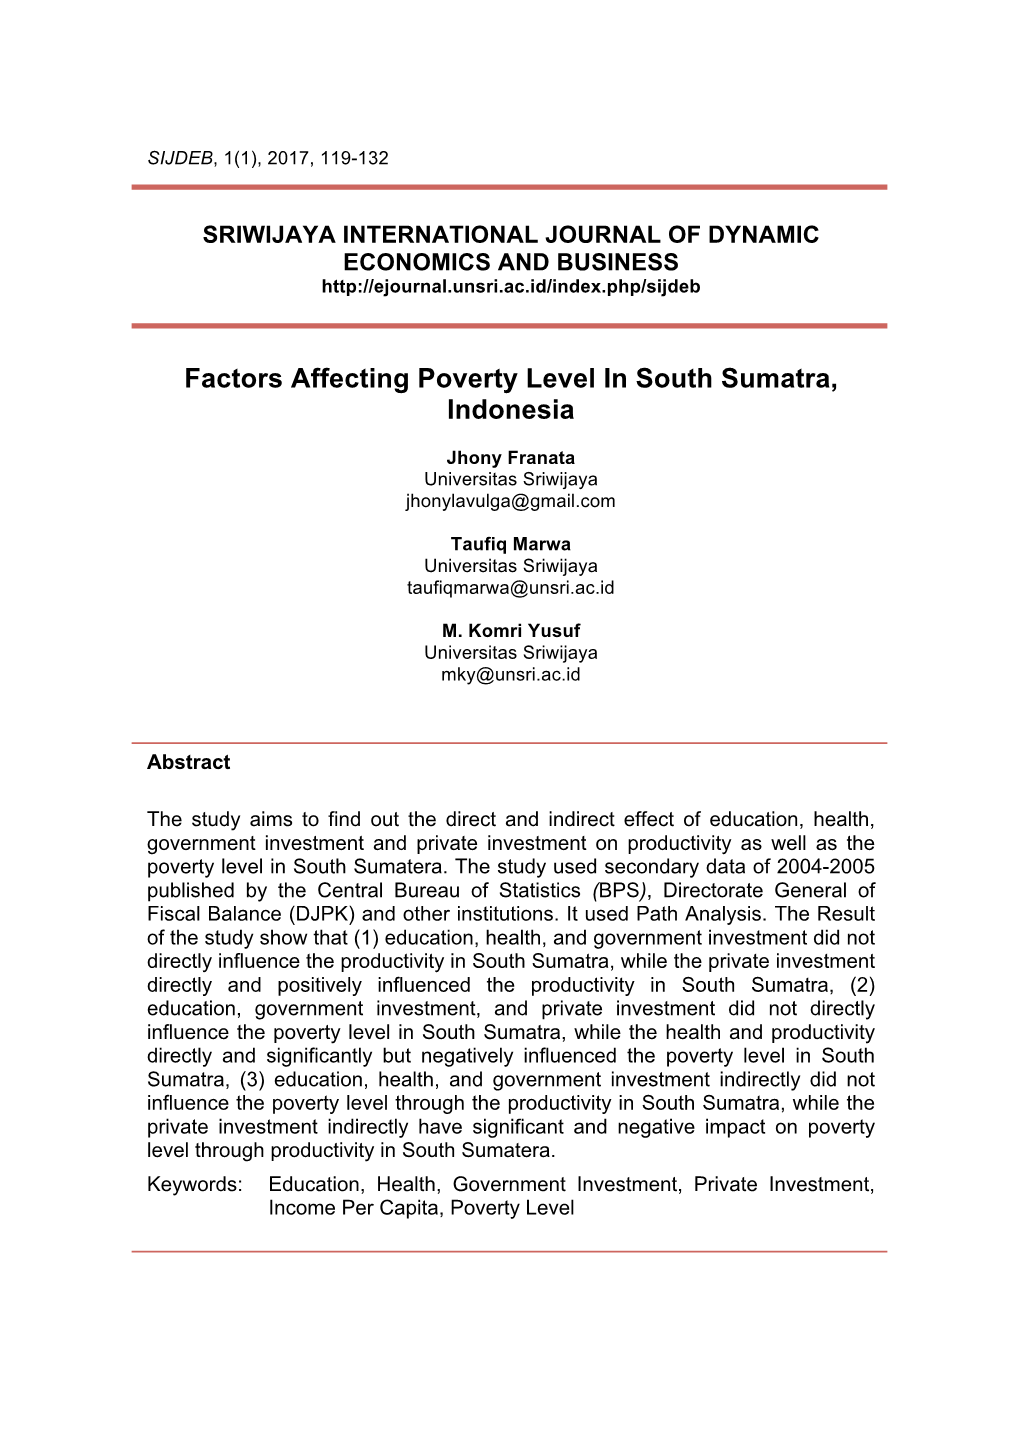 Factors Affecting Poverty Level in South Sumatra, Indonesia